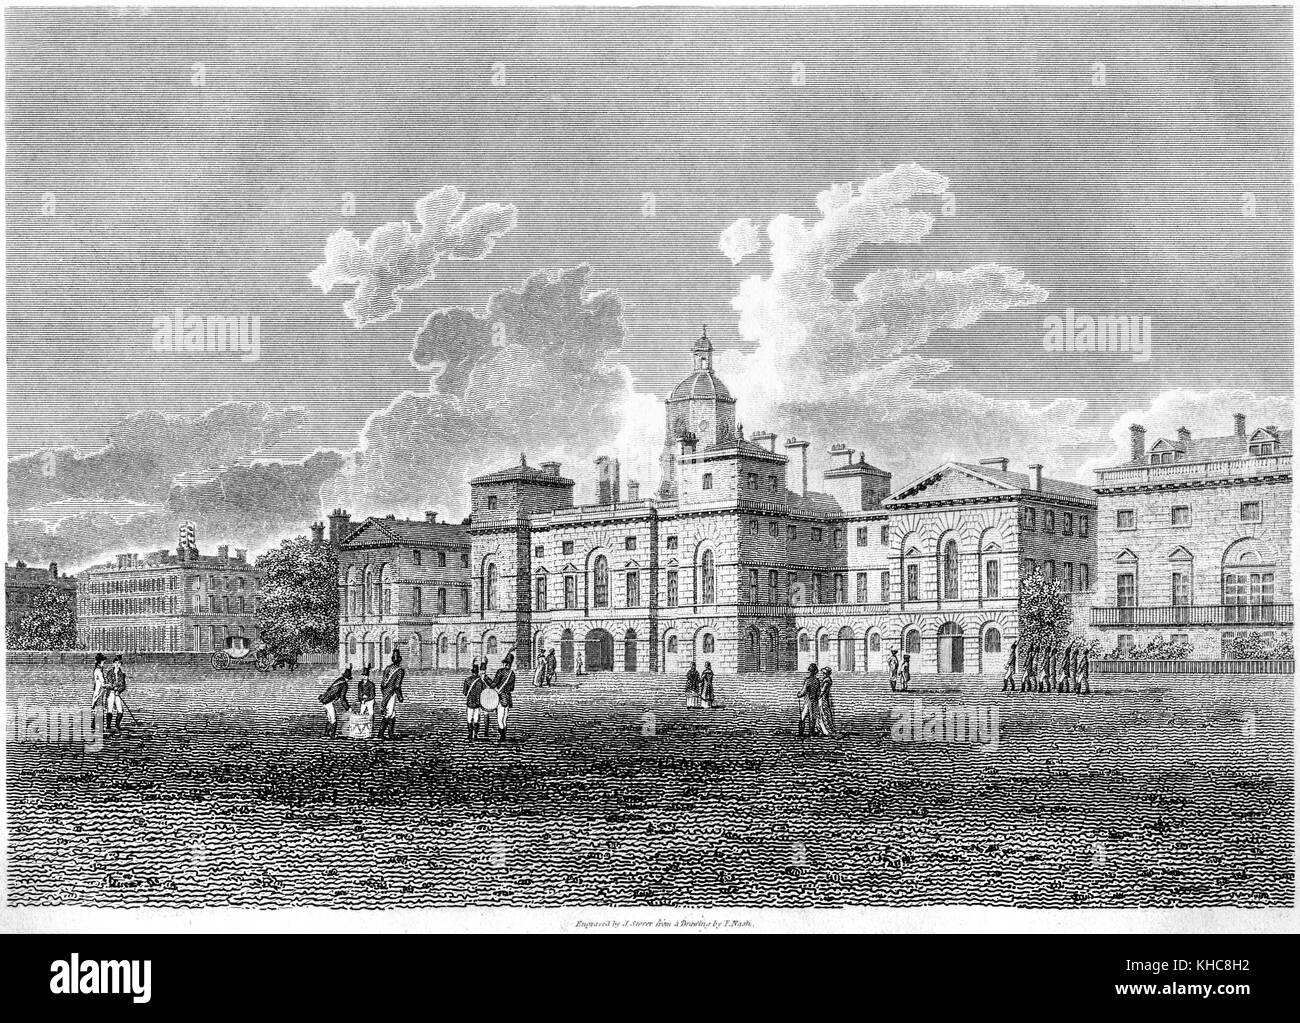 An engraving of The Admiralty and Horse Guards, Westminster scanned at high resolution from a book printed in 1819. Believed copyright free. Stock Photo